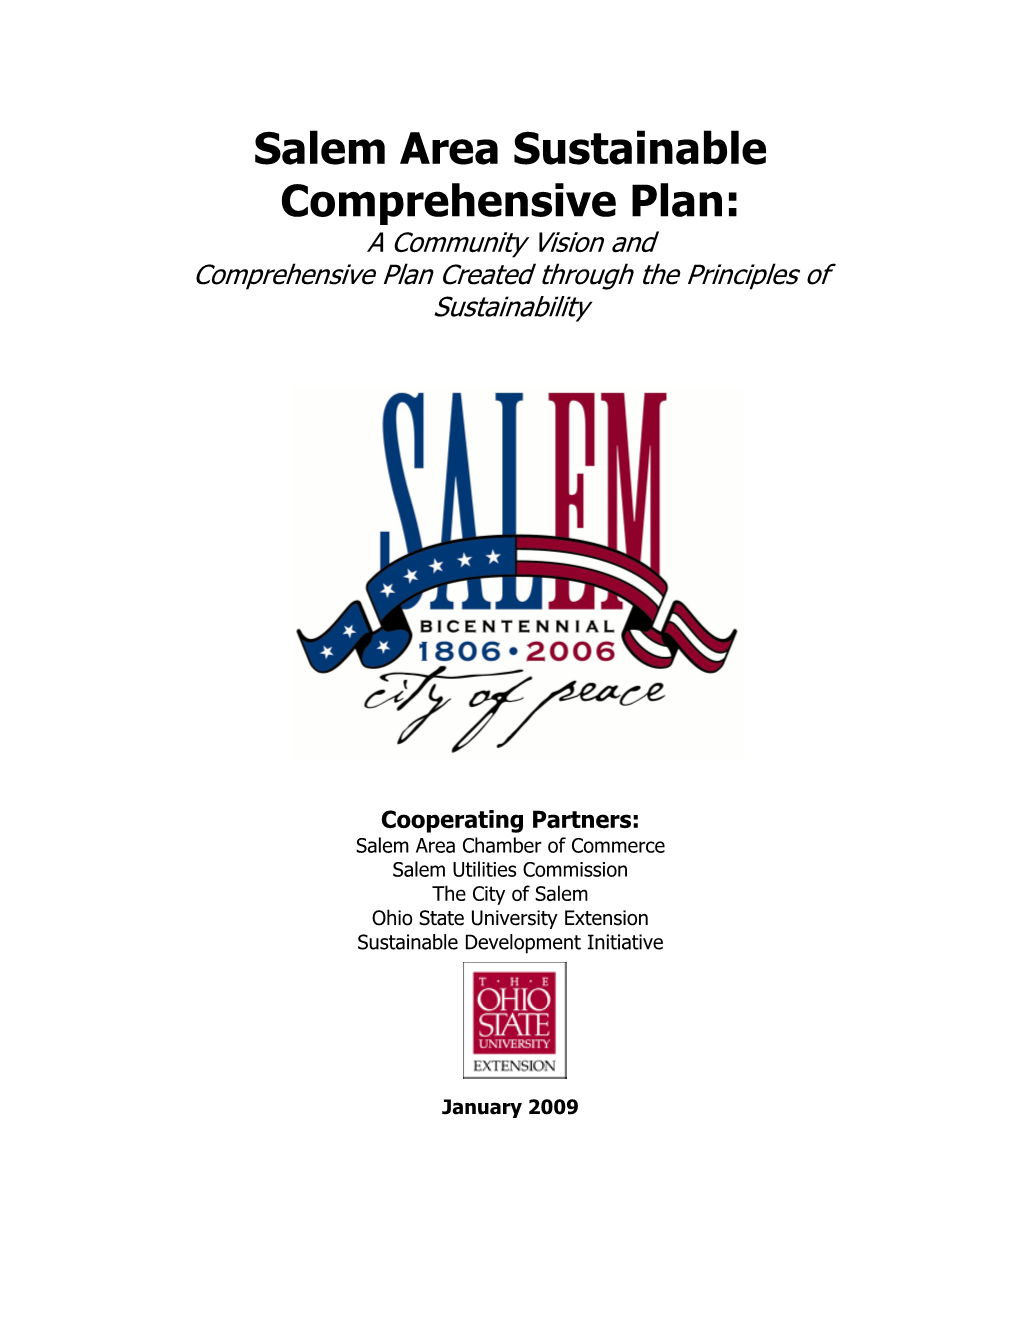 Salem Area Sustainable Comprehensive Plan: a Community Vision and Comprehensive Plan Created Through the Principles of Sustainability